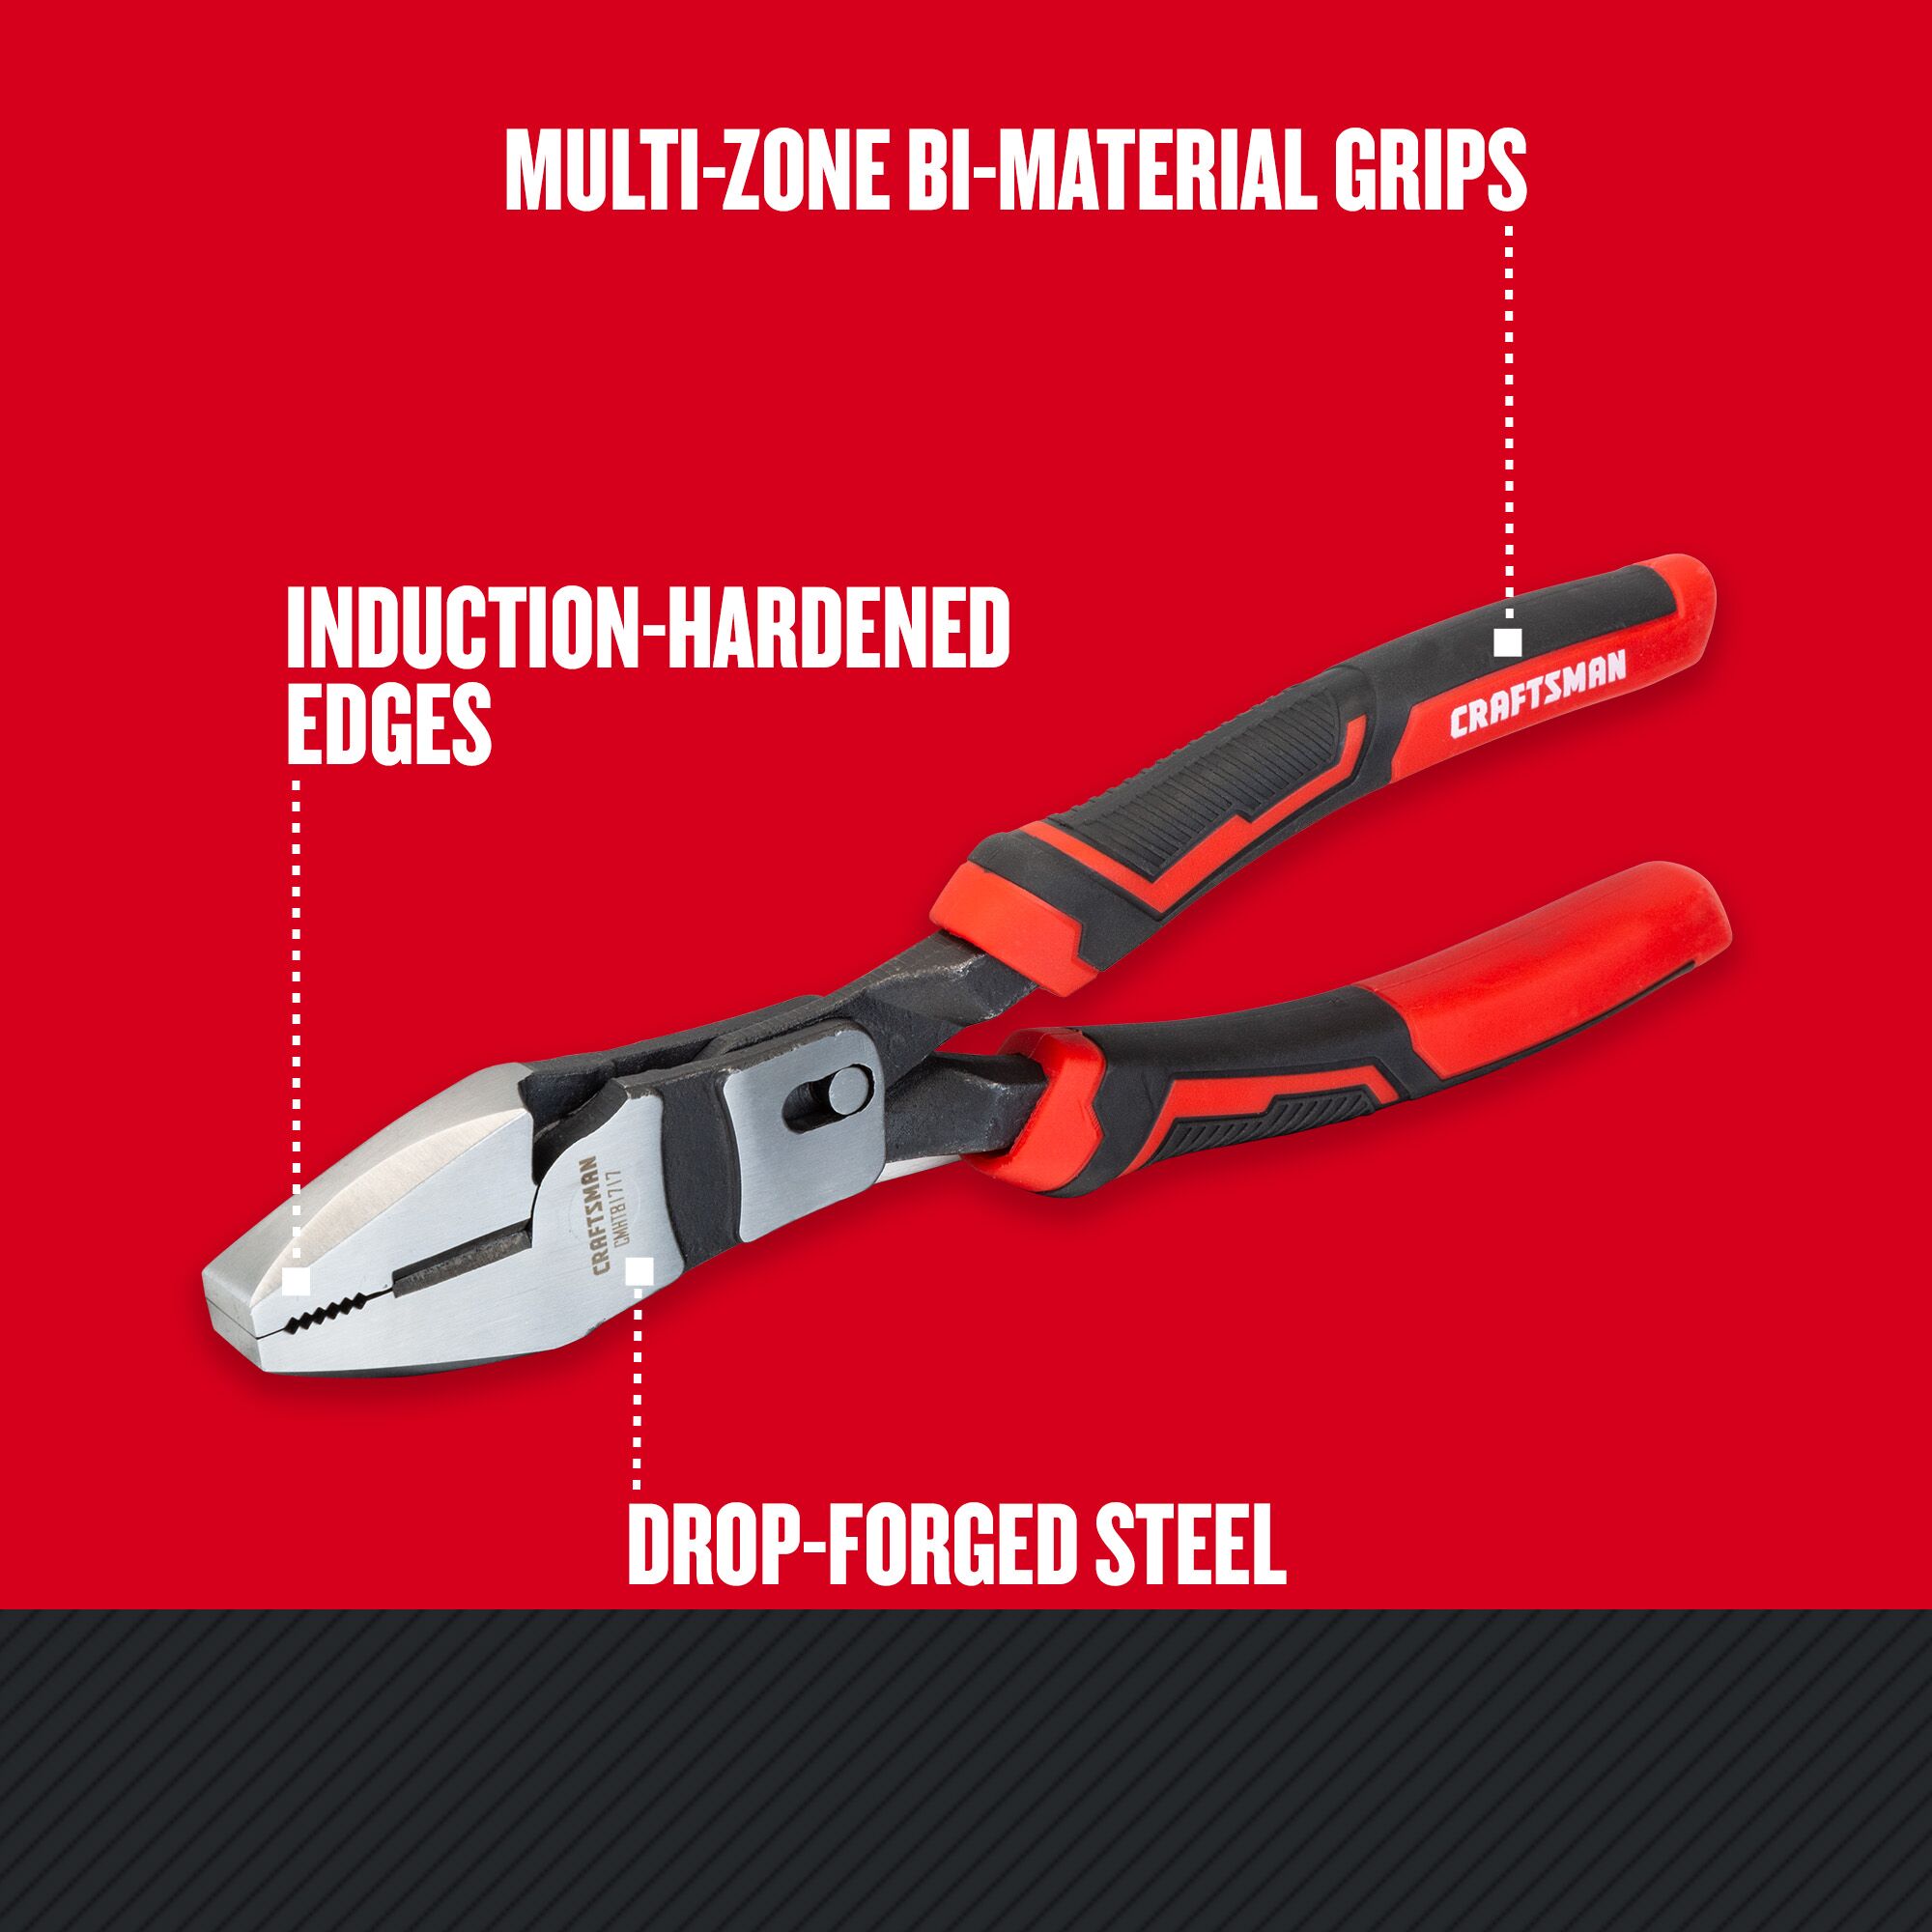 Graphic of CRAFTSMAN Pliers: Lineman highlighting product features